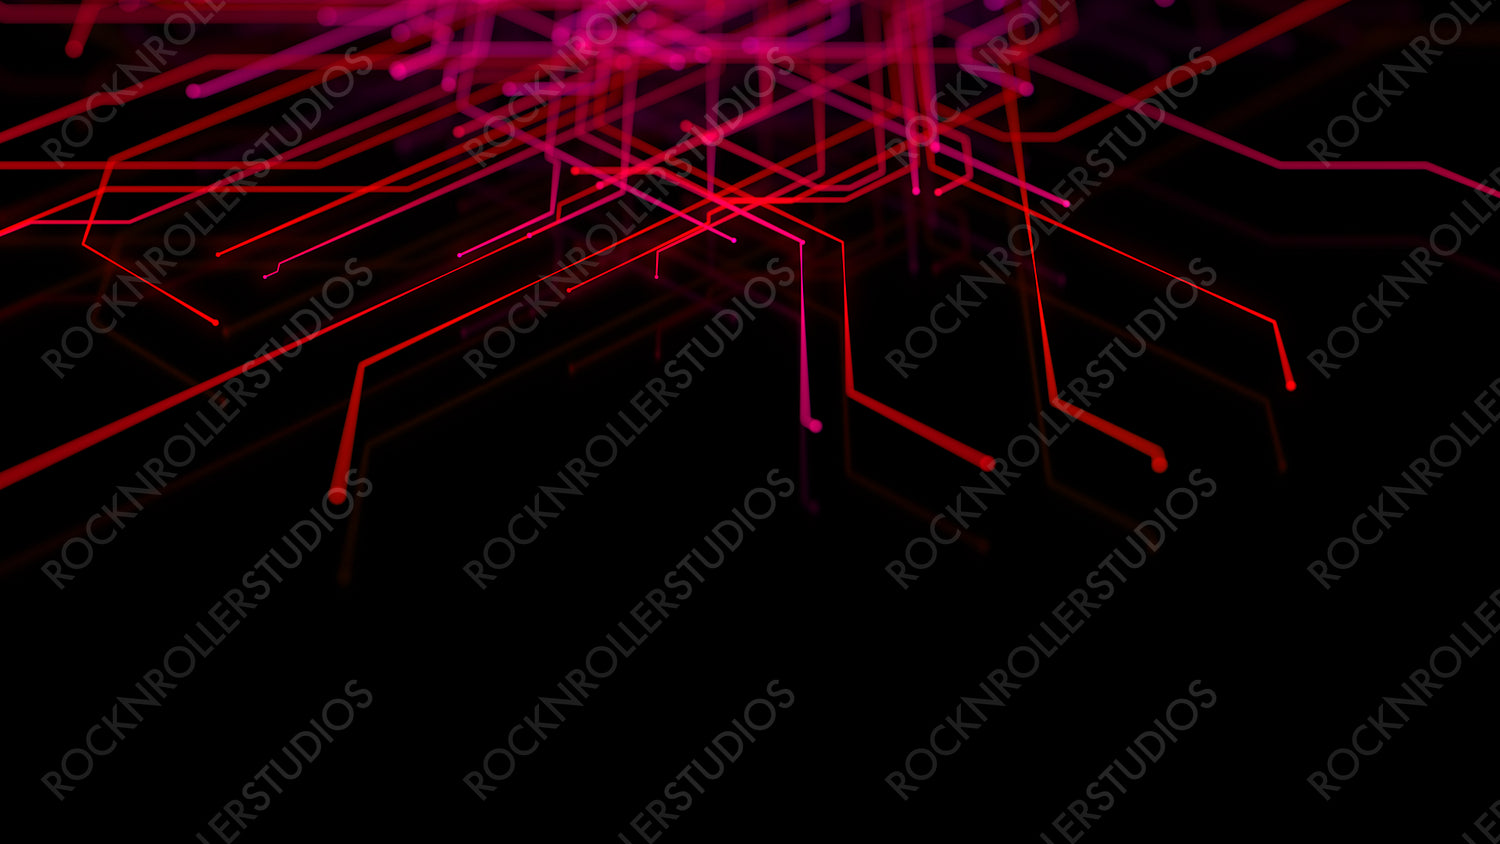 Red and Pink Network Lines form a Futuristic High-Tech Grid. Cyberspace Concept with copy-space.